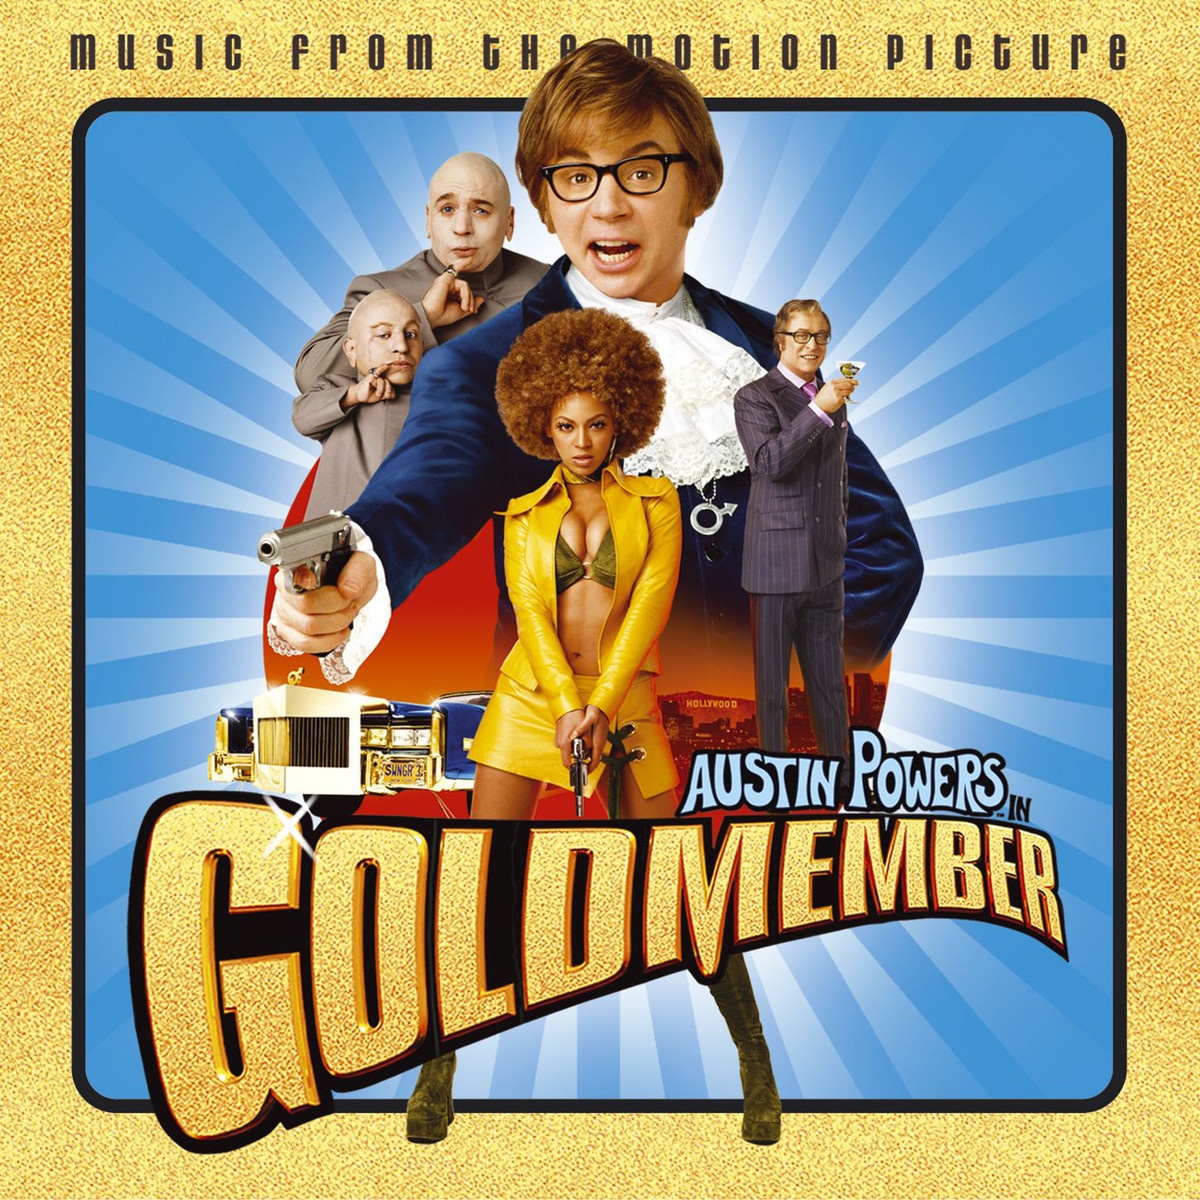 Austin Powers In Goldmember (Music from the Motion Picture)